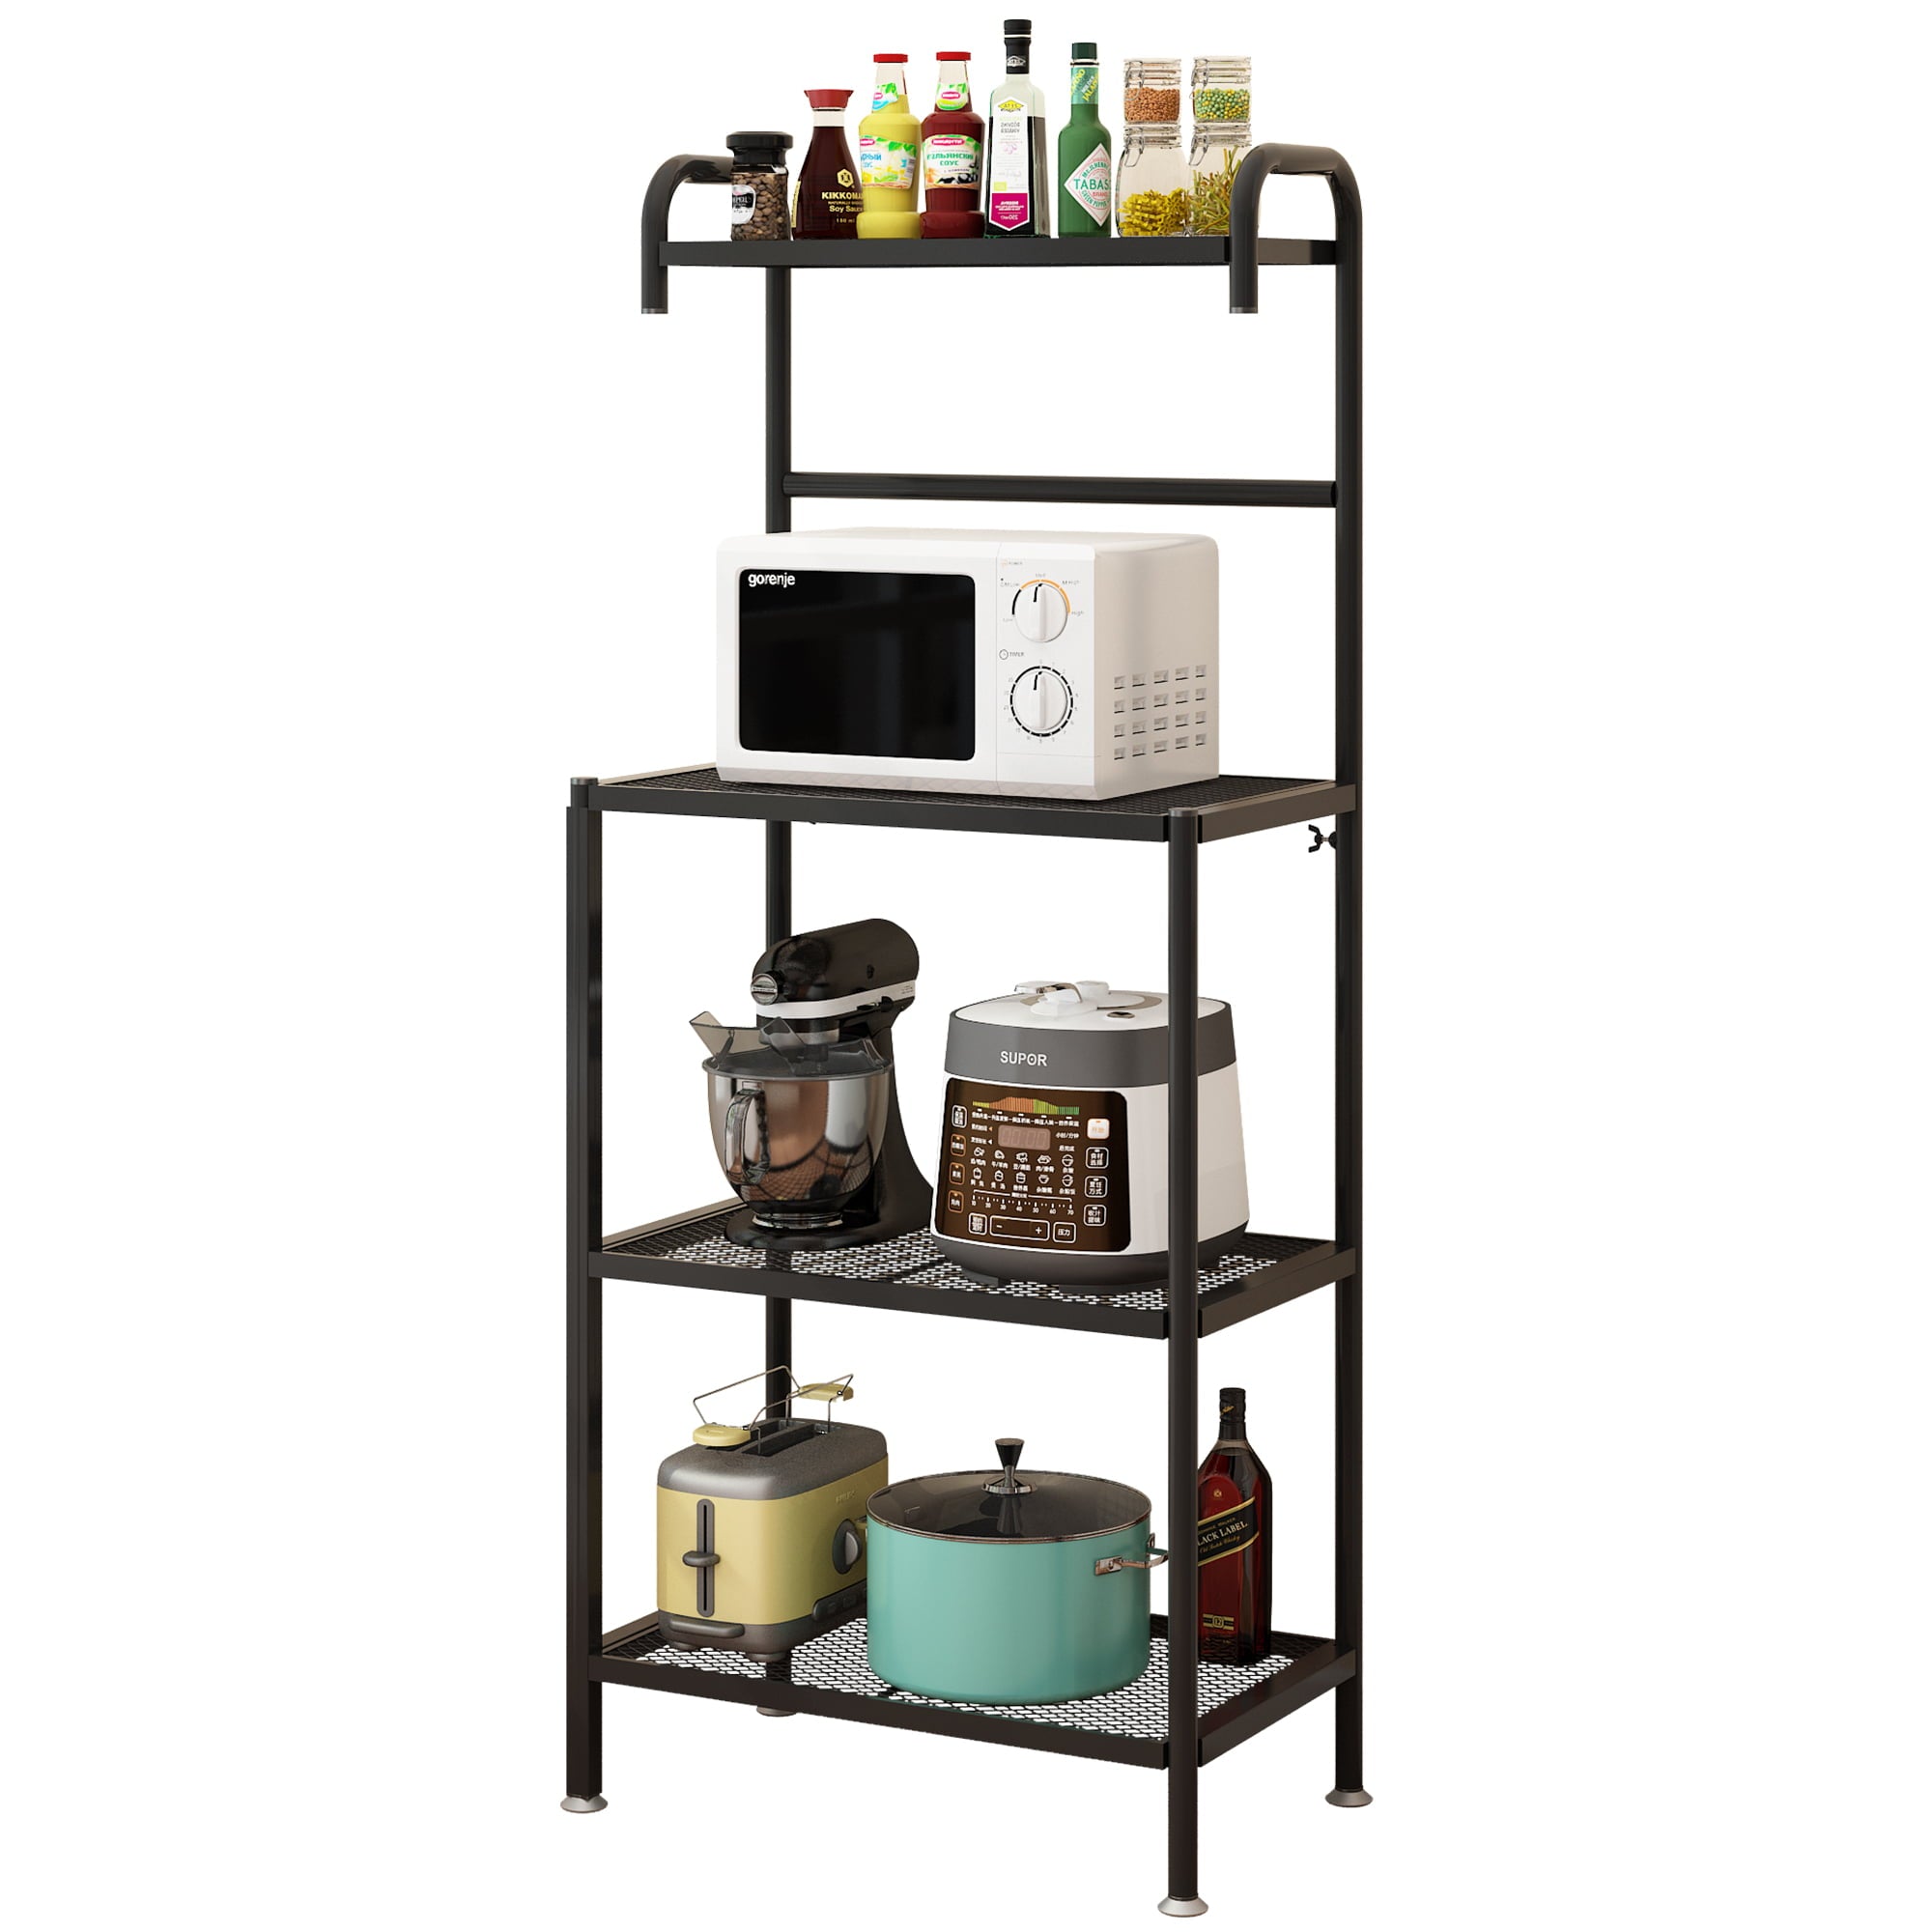 Ktaxon 4 Layers Baker's Rack Microwave Oven Stand Free Standing Kitchen Utility Storage Shelving Organizer， Kitchen Island Cart， Coffee Bar Table， Black